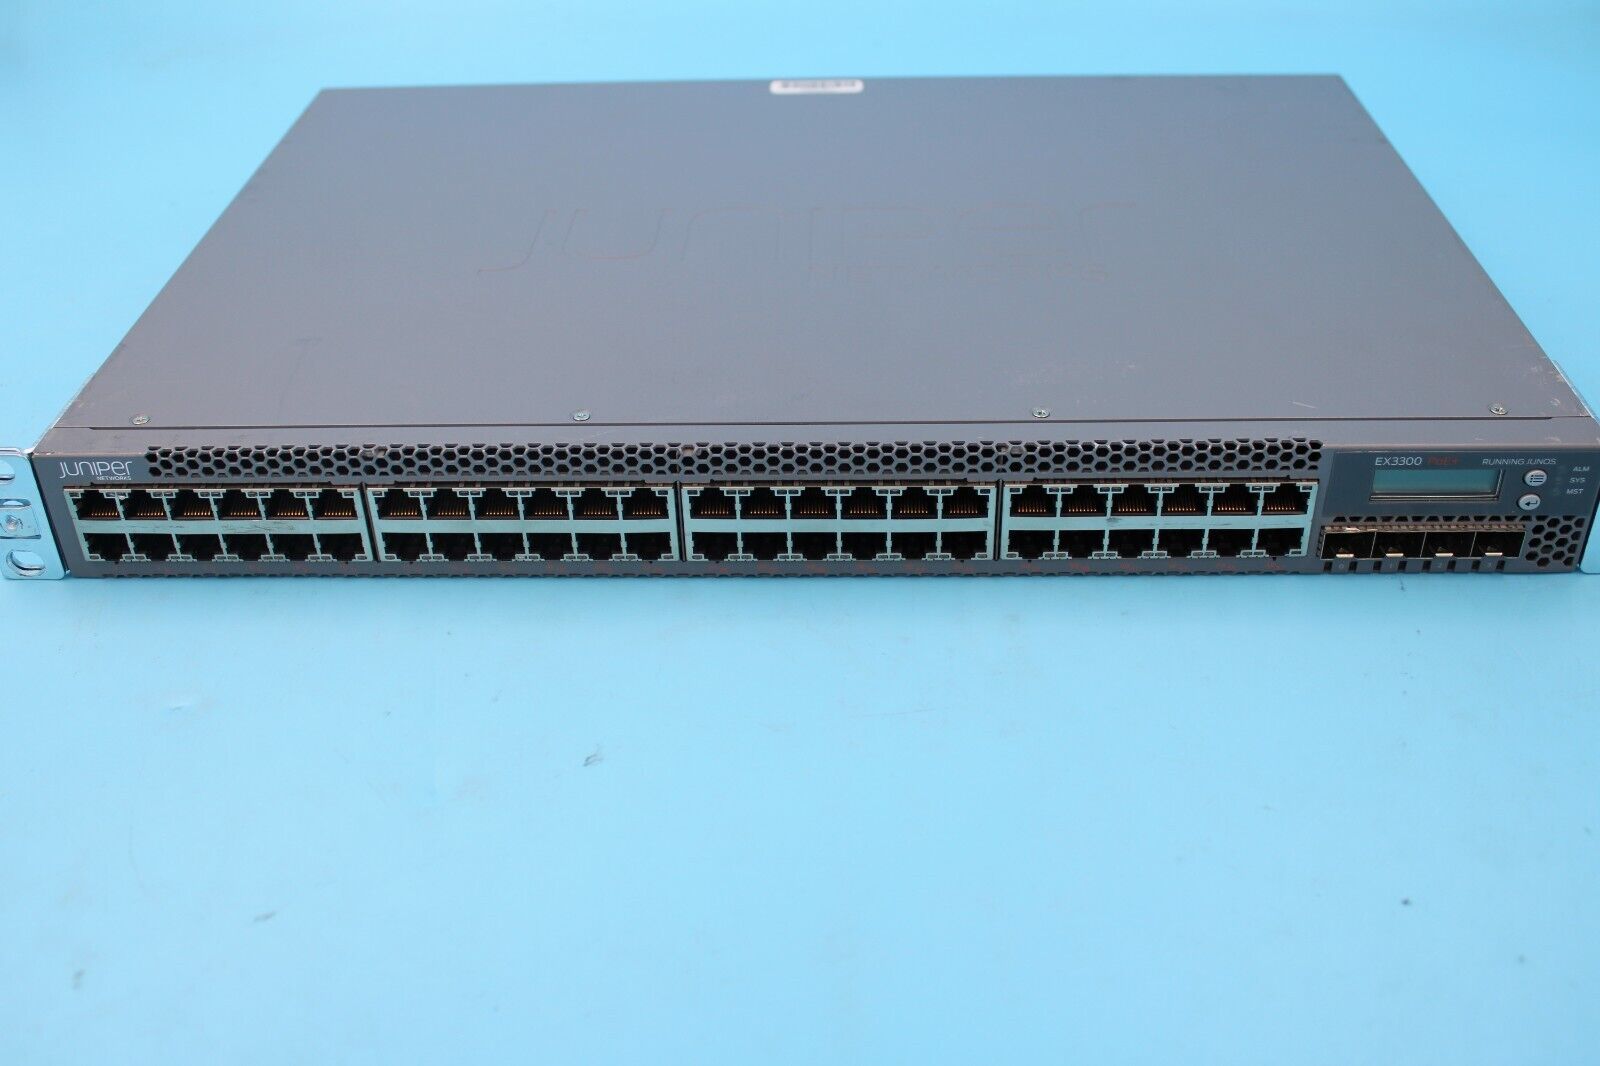 Juniper Networks EX3300-48P 48-Port PoE+ 4x SFP+ Network Switch TESTED